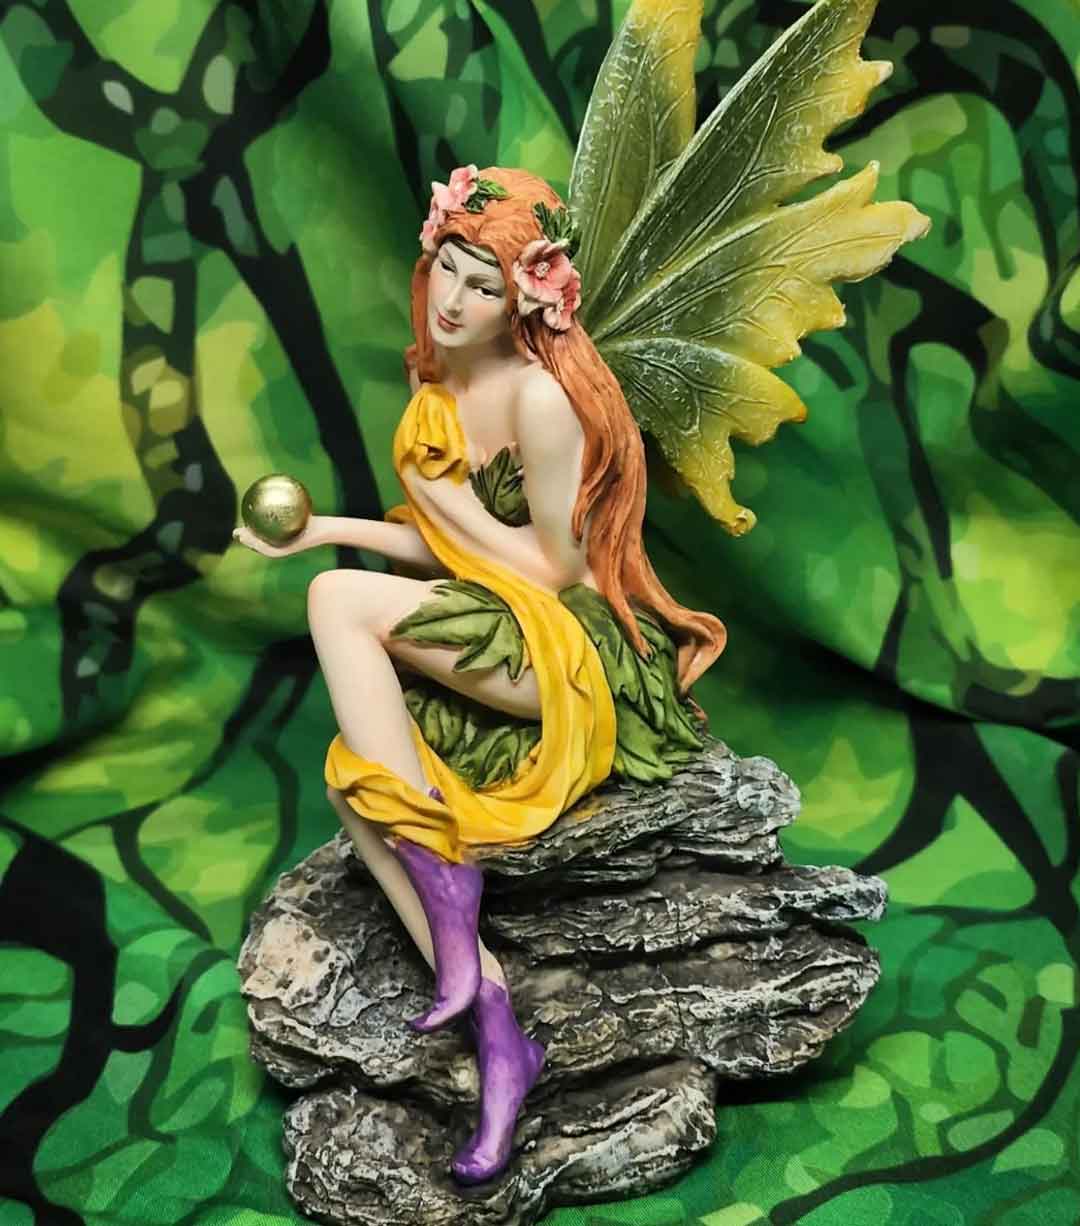 Red haired fairy with a green dress and green butterfly wings sitting on a rock